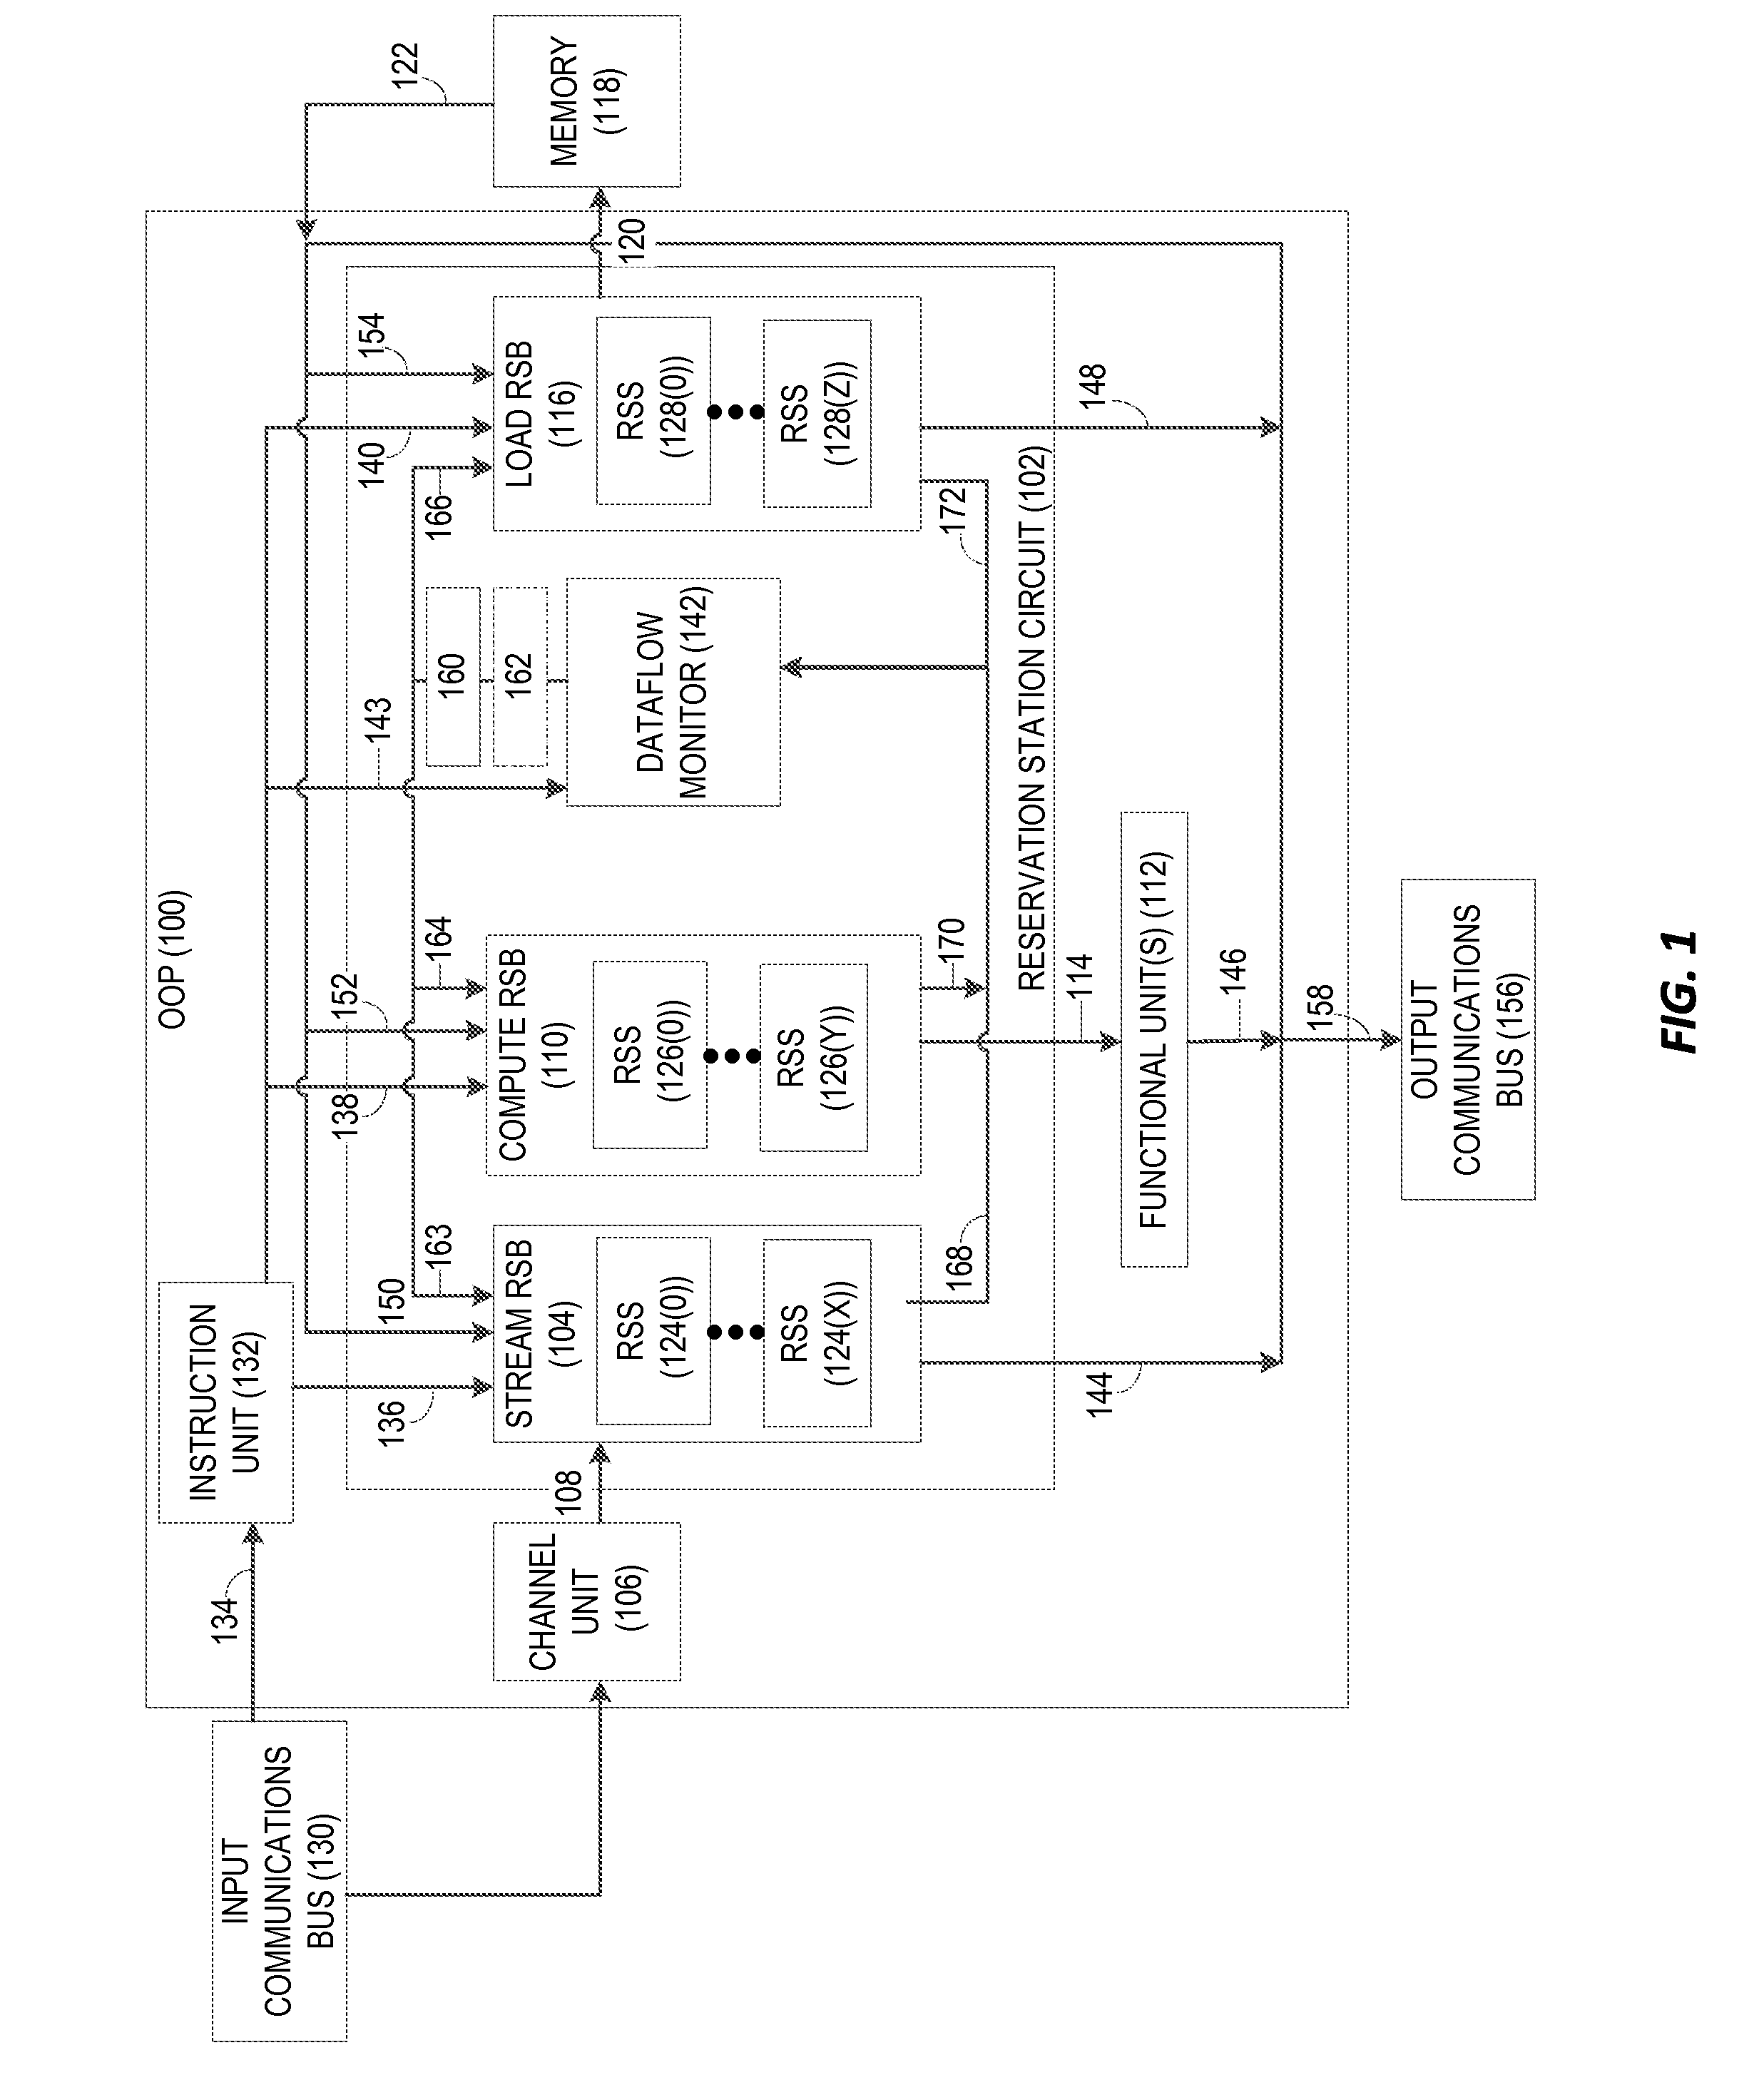 PROVIDING LOWER-OVERHEAD MANAGEMENT OF DATAFLOW EXECUTION OF LOOP INSTRUCTIONS BY OUT-OF-ORDER PROCESSORS (OOPs), AND RELATED CIRCUITS, METHODS, AND COMPUTER-READABLE MEDIA